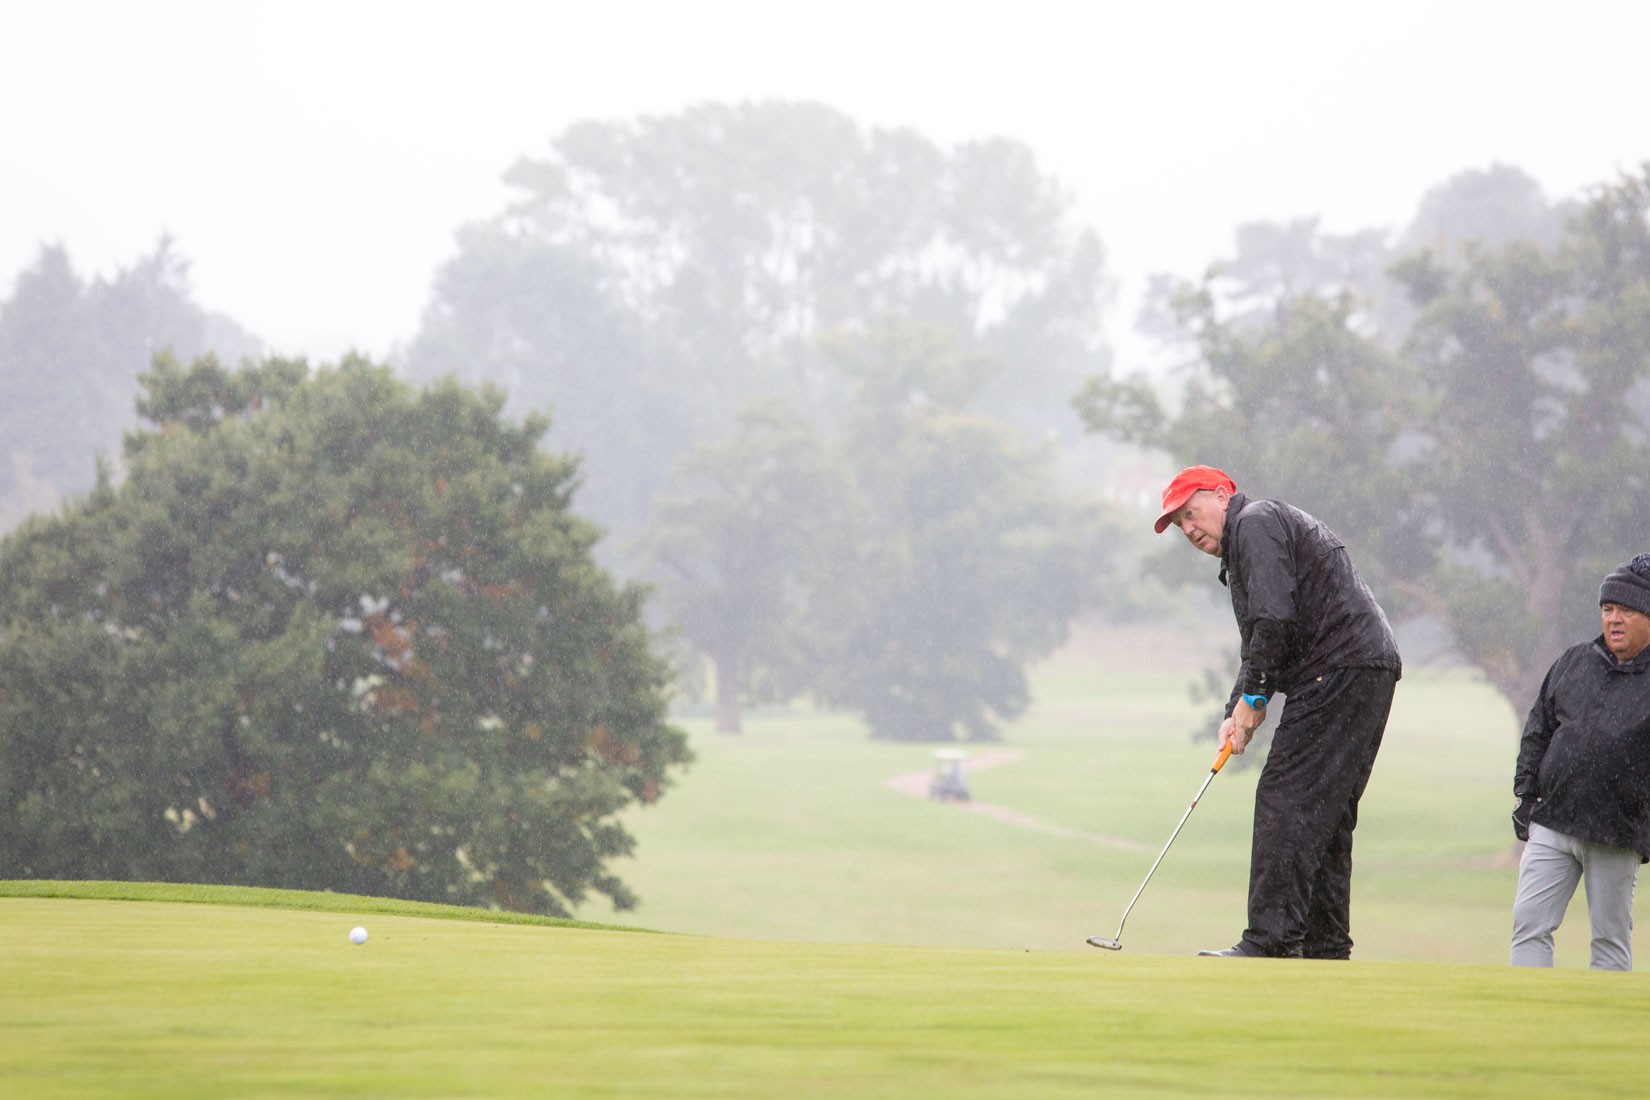 Golf day in the wet